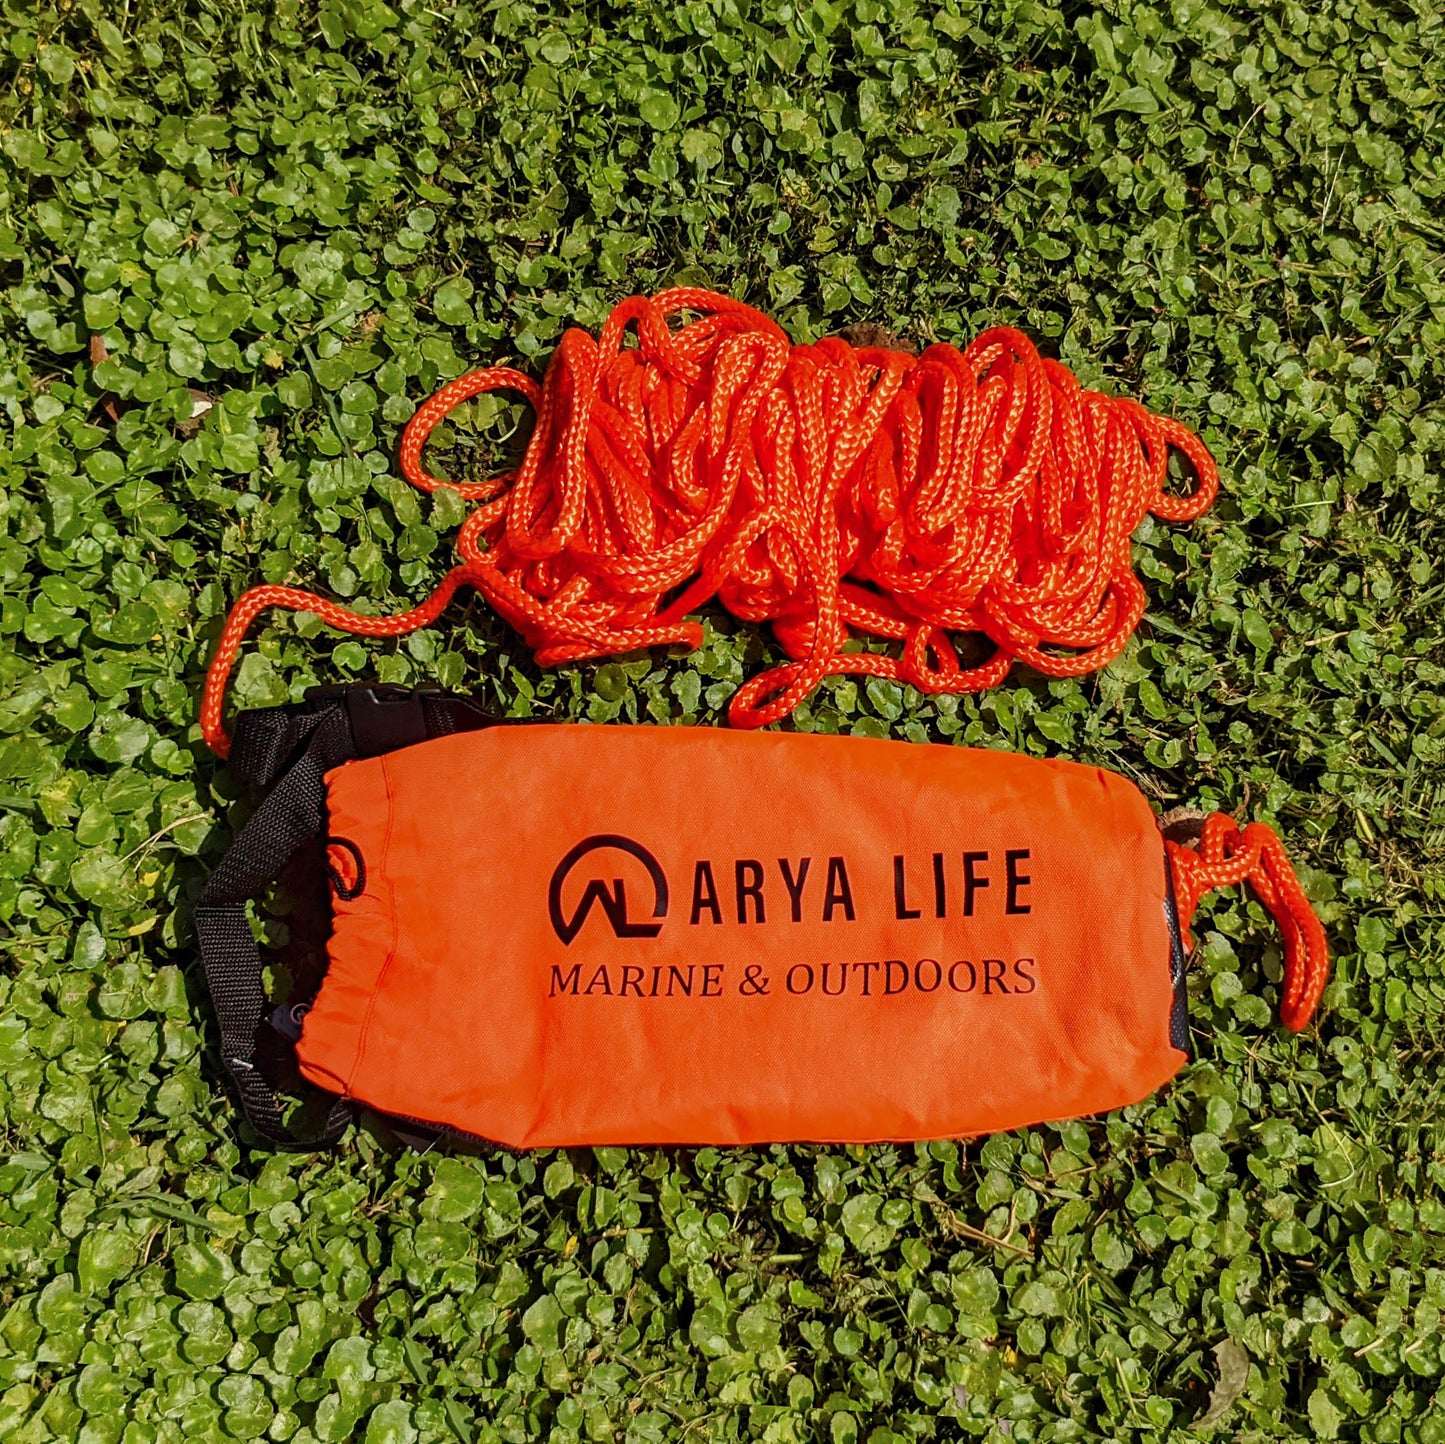 70ft Throw Rope Rescue Bag